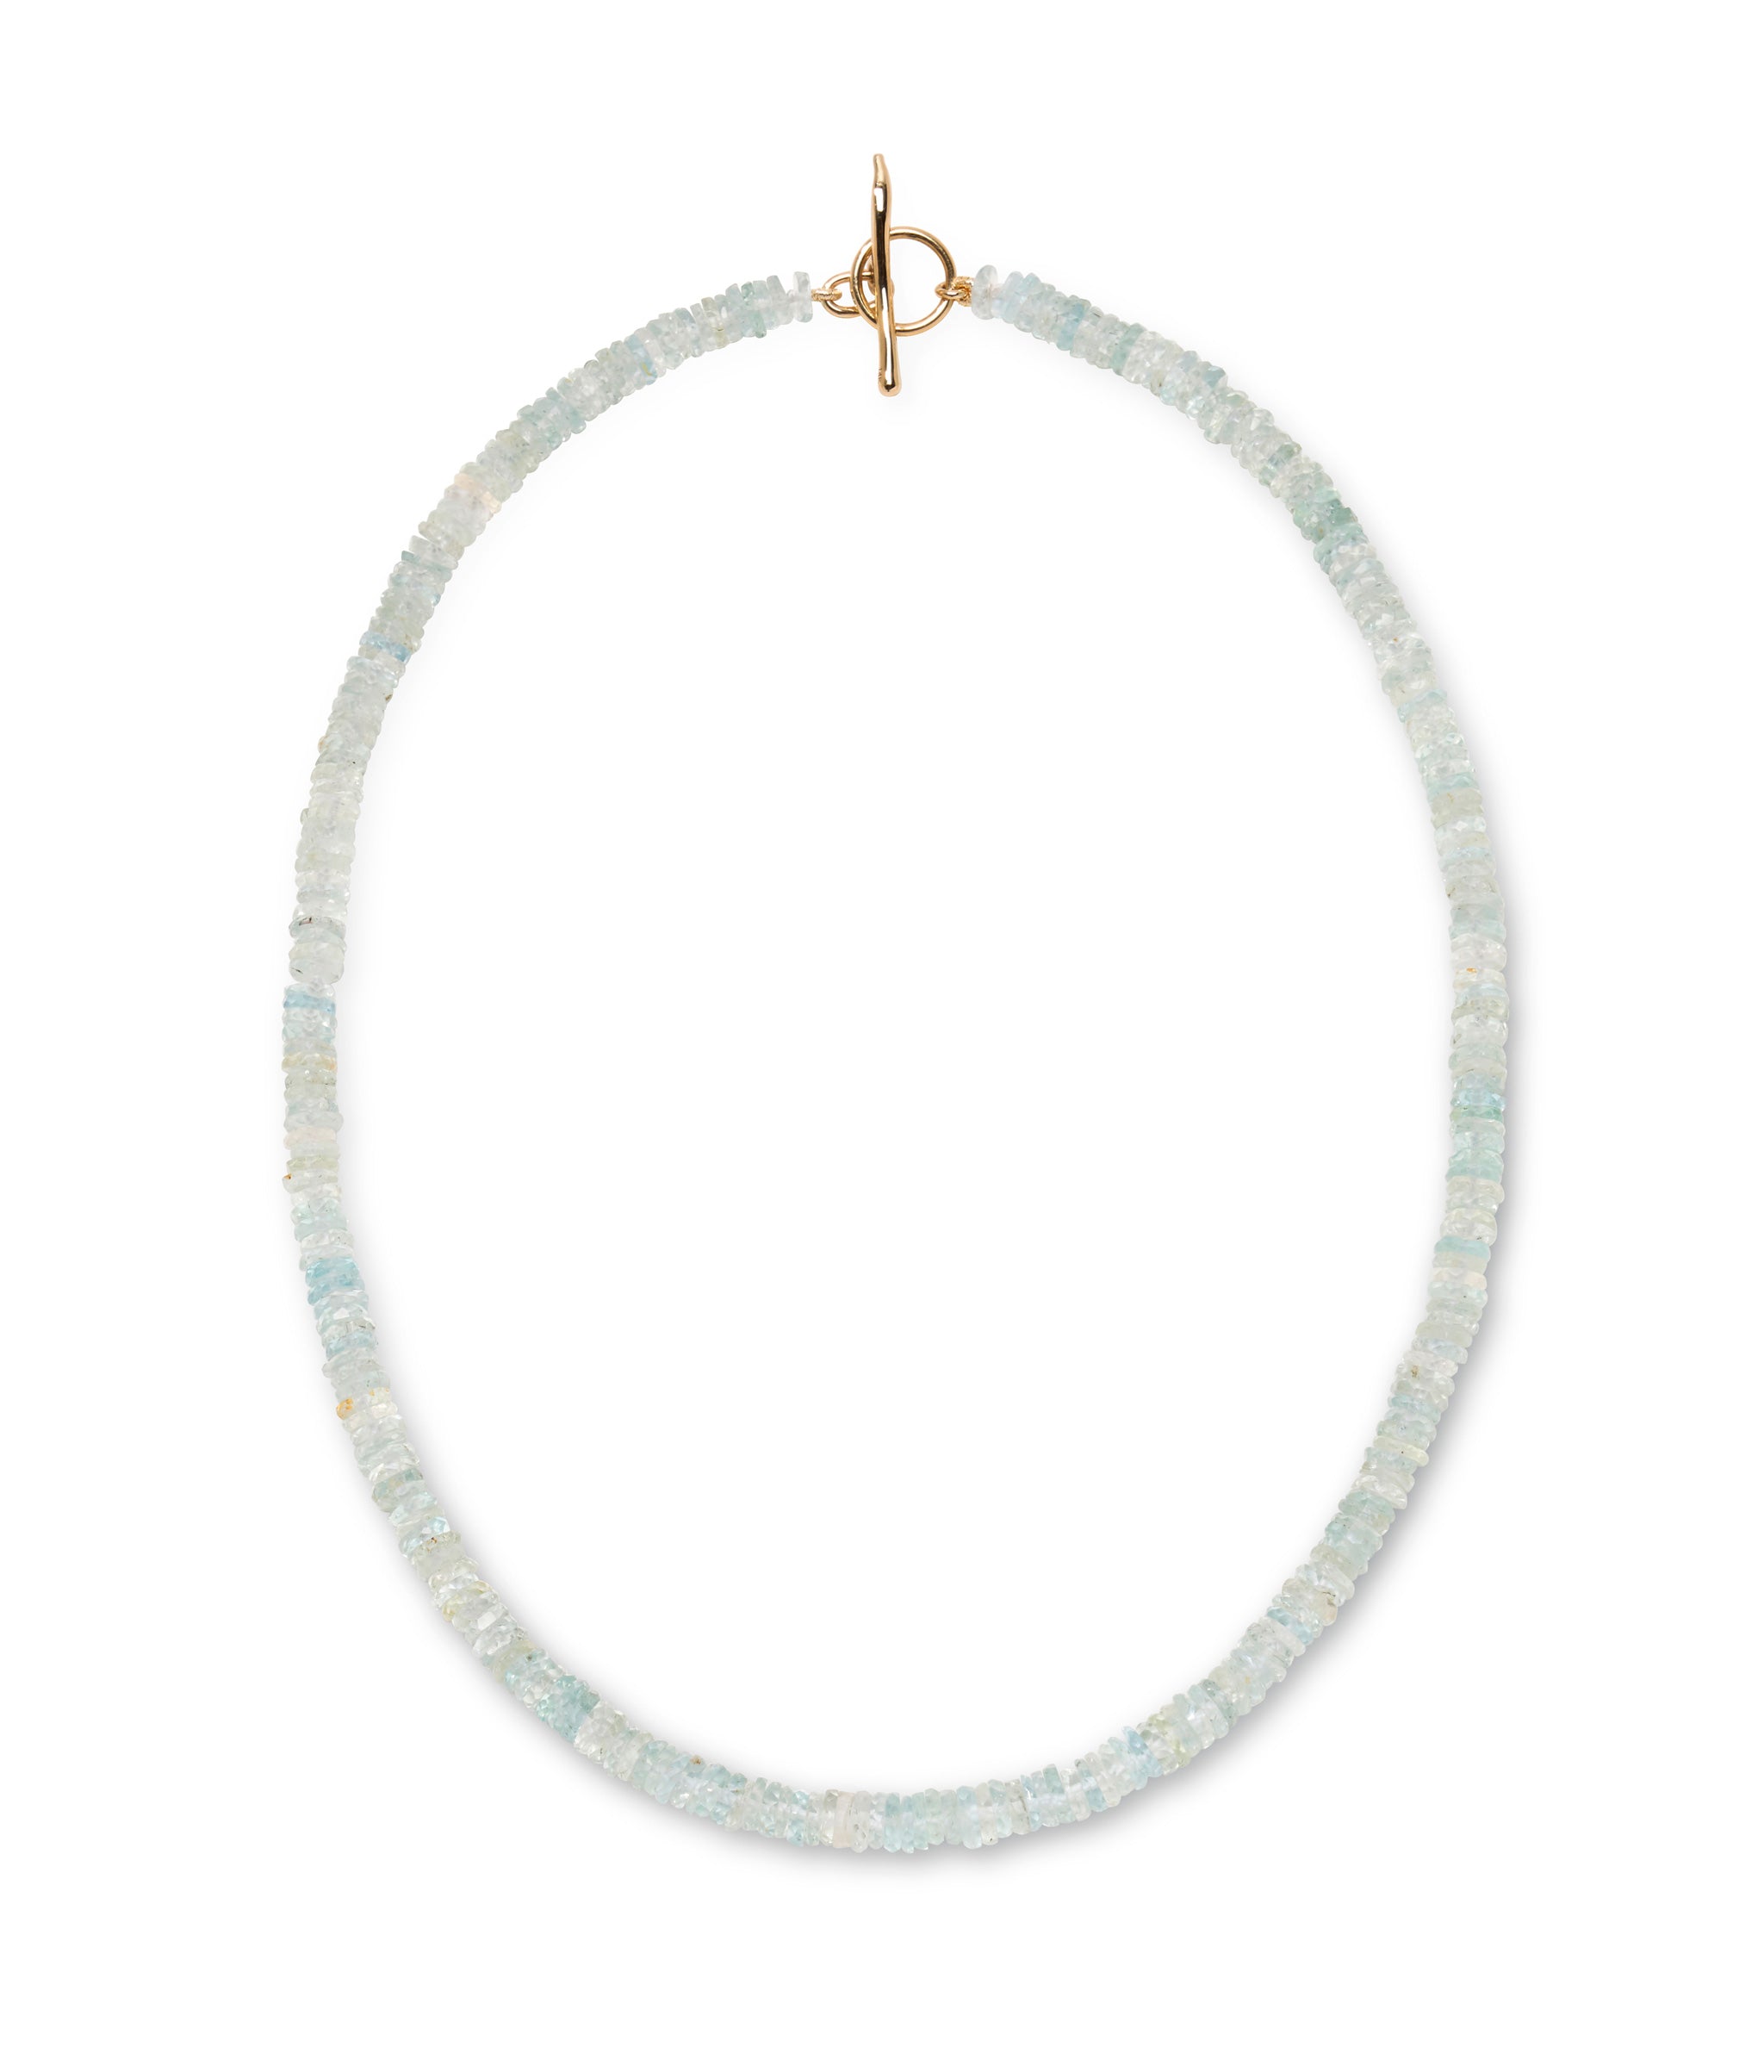 Faceted Aquamarine 14k Gold Necklace. Faceted aquamarine heishi beads with 14k yellow gold toggle closure.